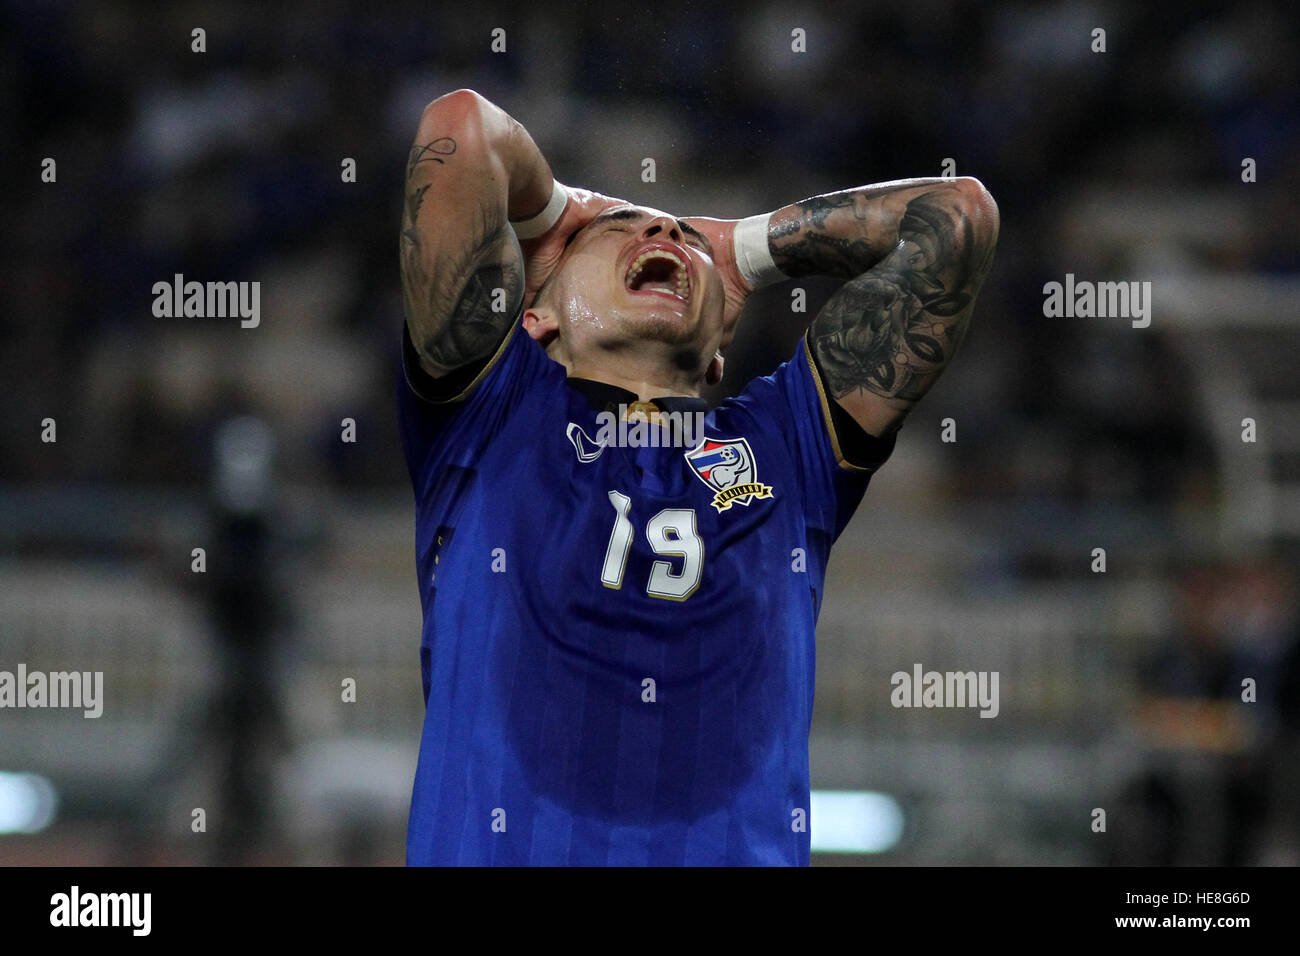 Thailand 17th Dec 16 Tristan Do Player Of Thailand In Action During The Aff Suzuki Cup Final Football Match Thailand Beats Indonesia 2 0 At Rajamangala National Stadium In Bangkok C Vichan Poti Pacific Press Alamy